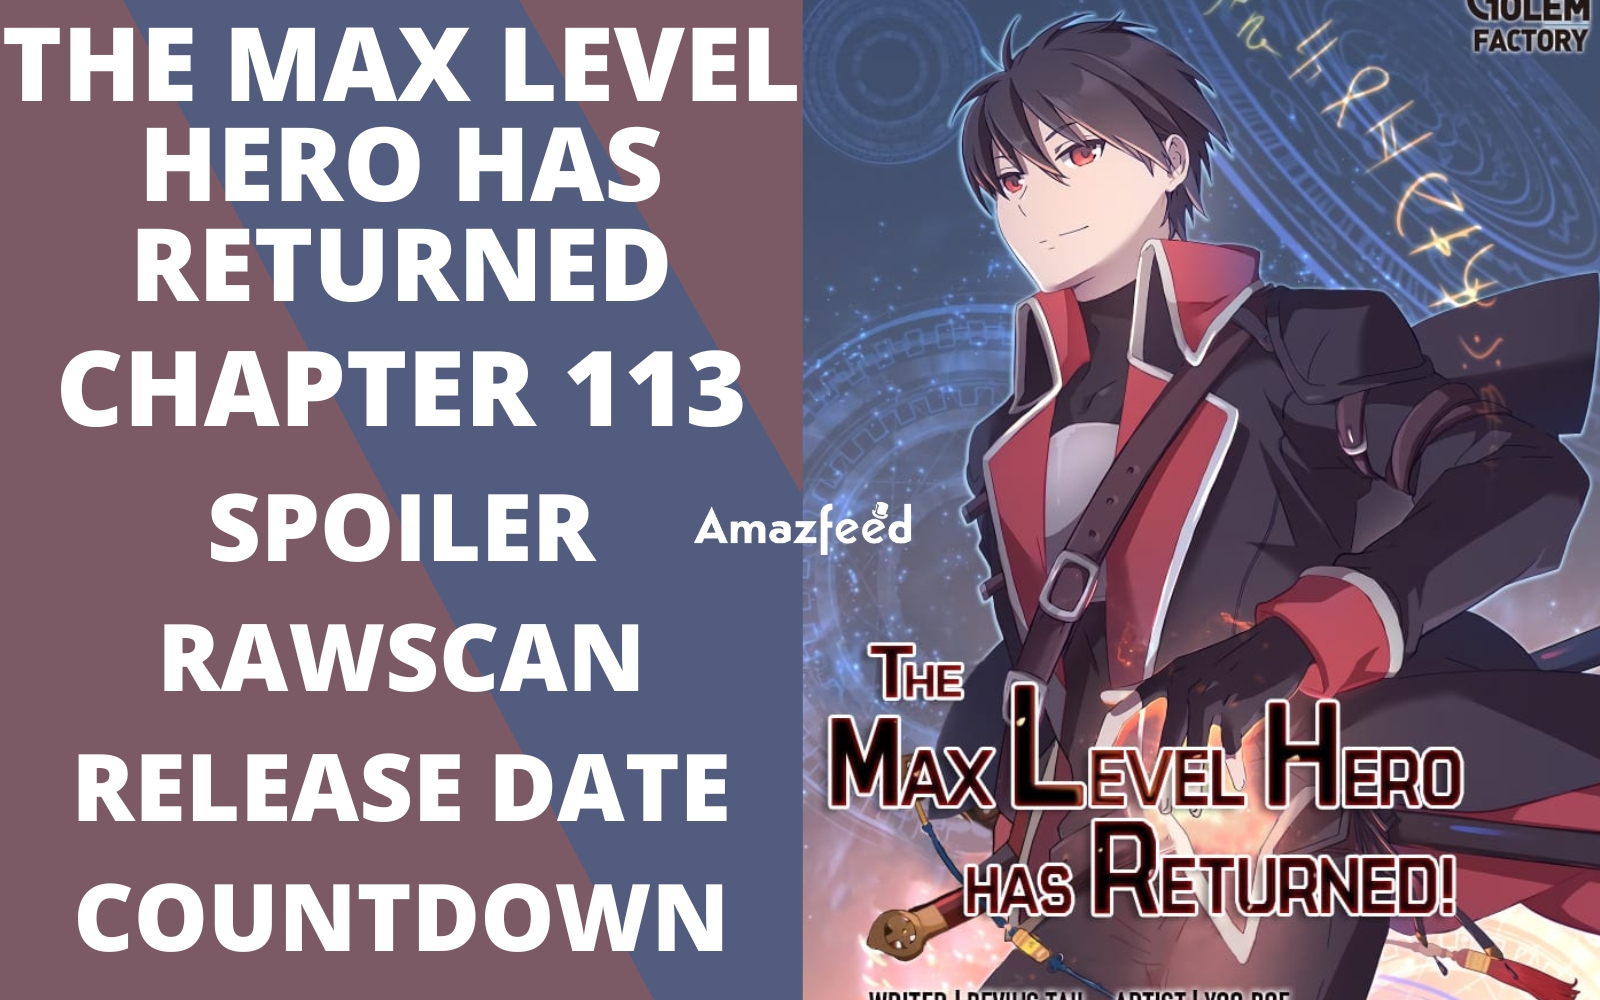 The Max Level Hero Has Returned Chapter 113 Spoiler, Release Date, Raw Scan, Countdown, Color Page